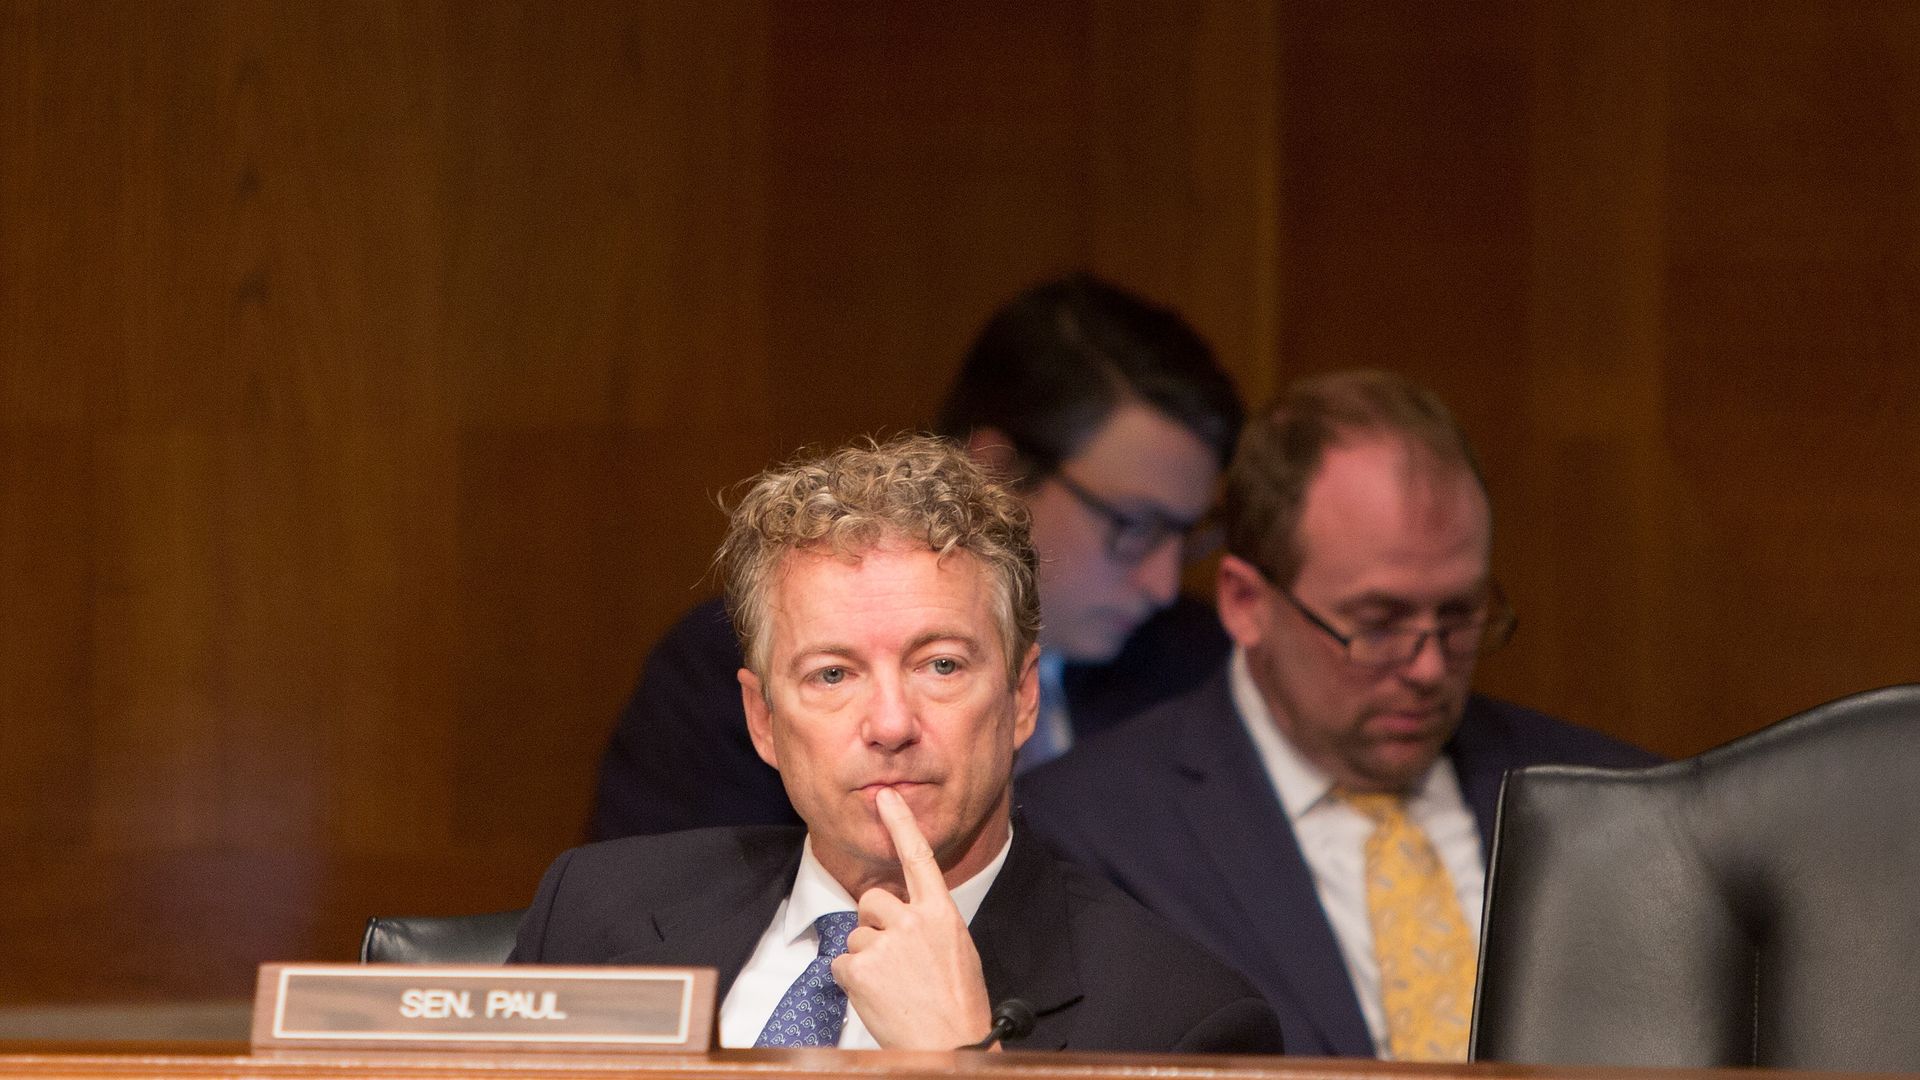 In this image, Senator Rand Paul sits behind his name plaque at a hearing.